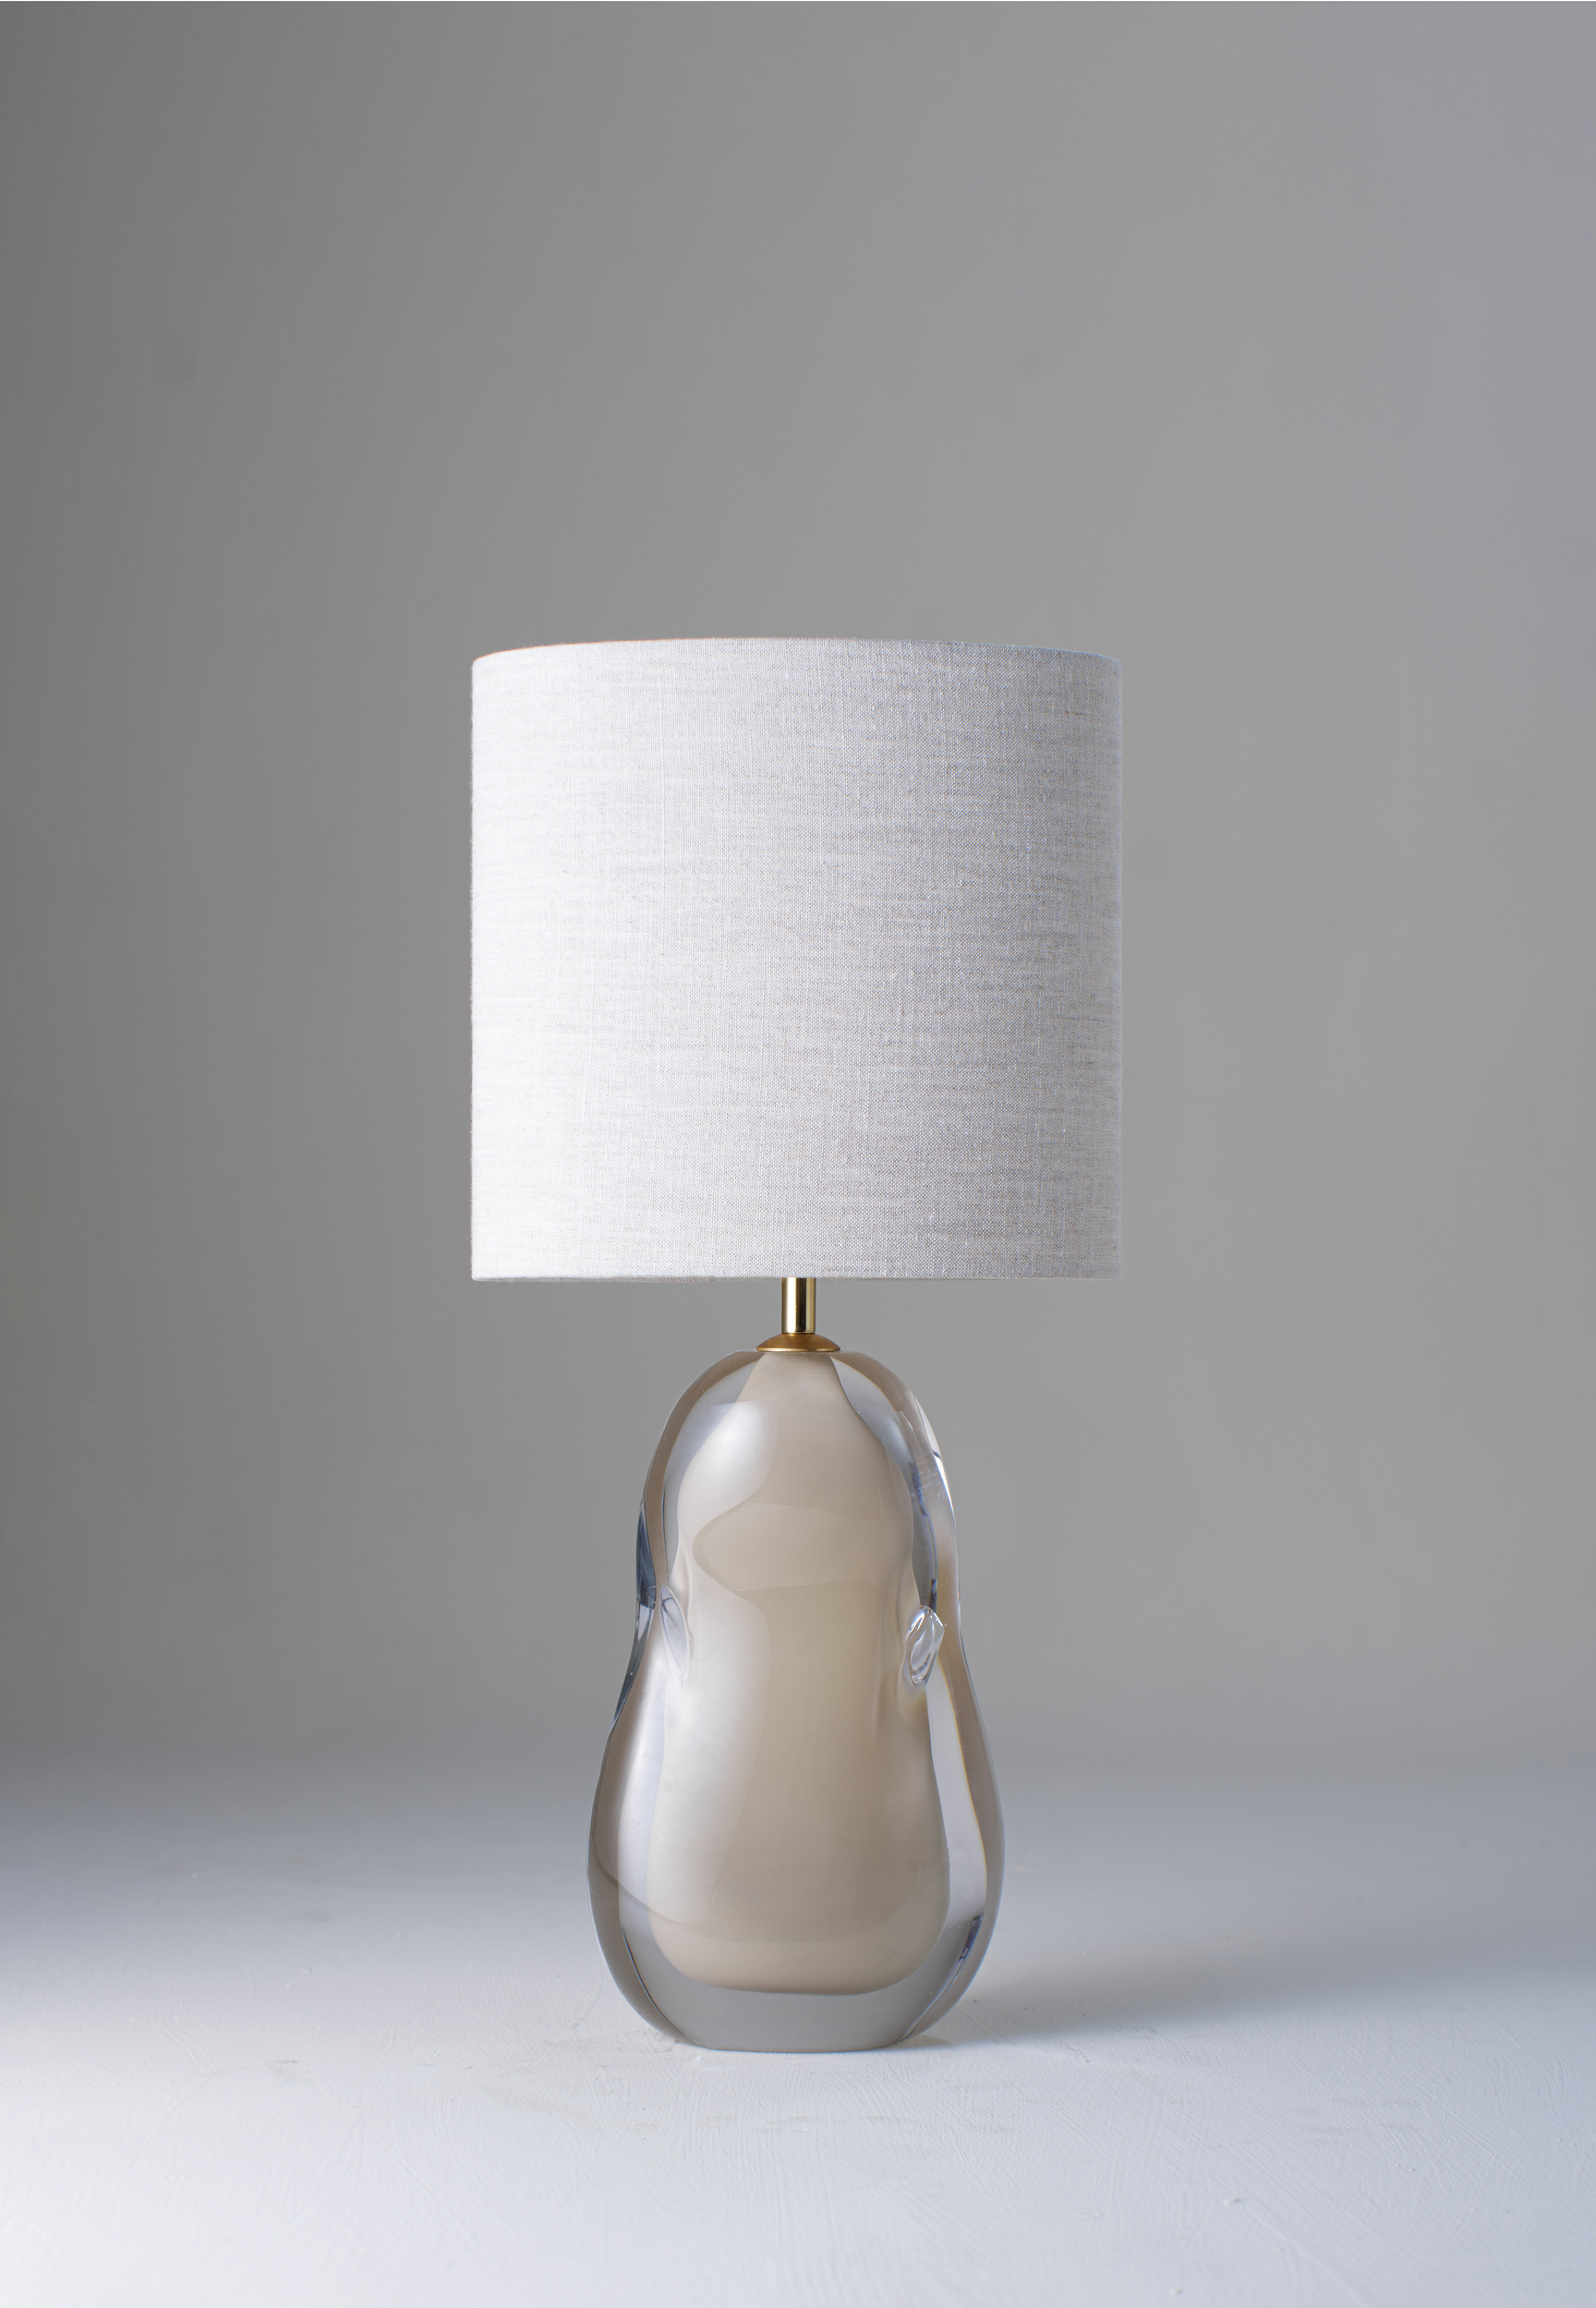 Moth shown with 10" slim straight oval Lampsahde in natural linen with cream card lining